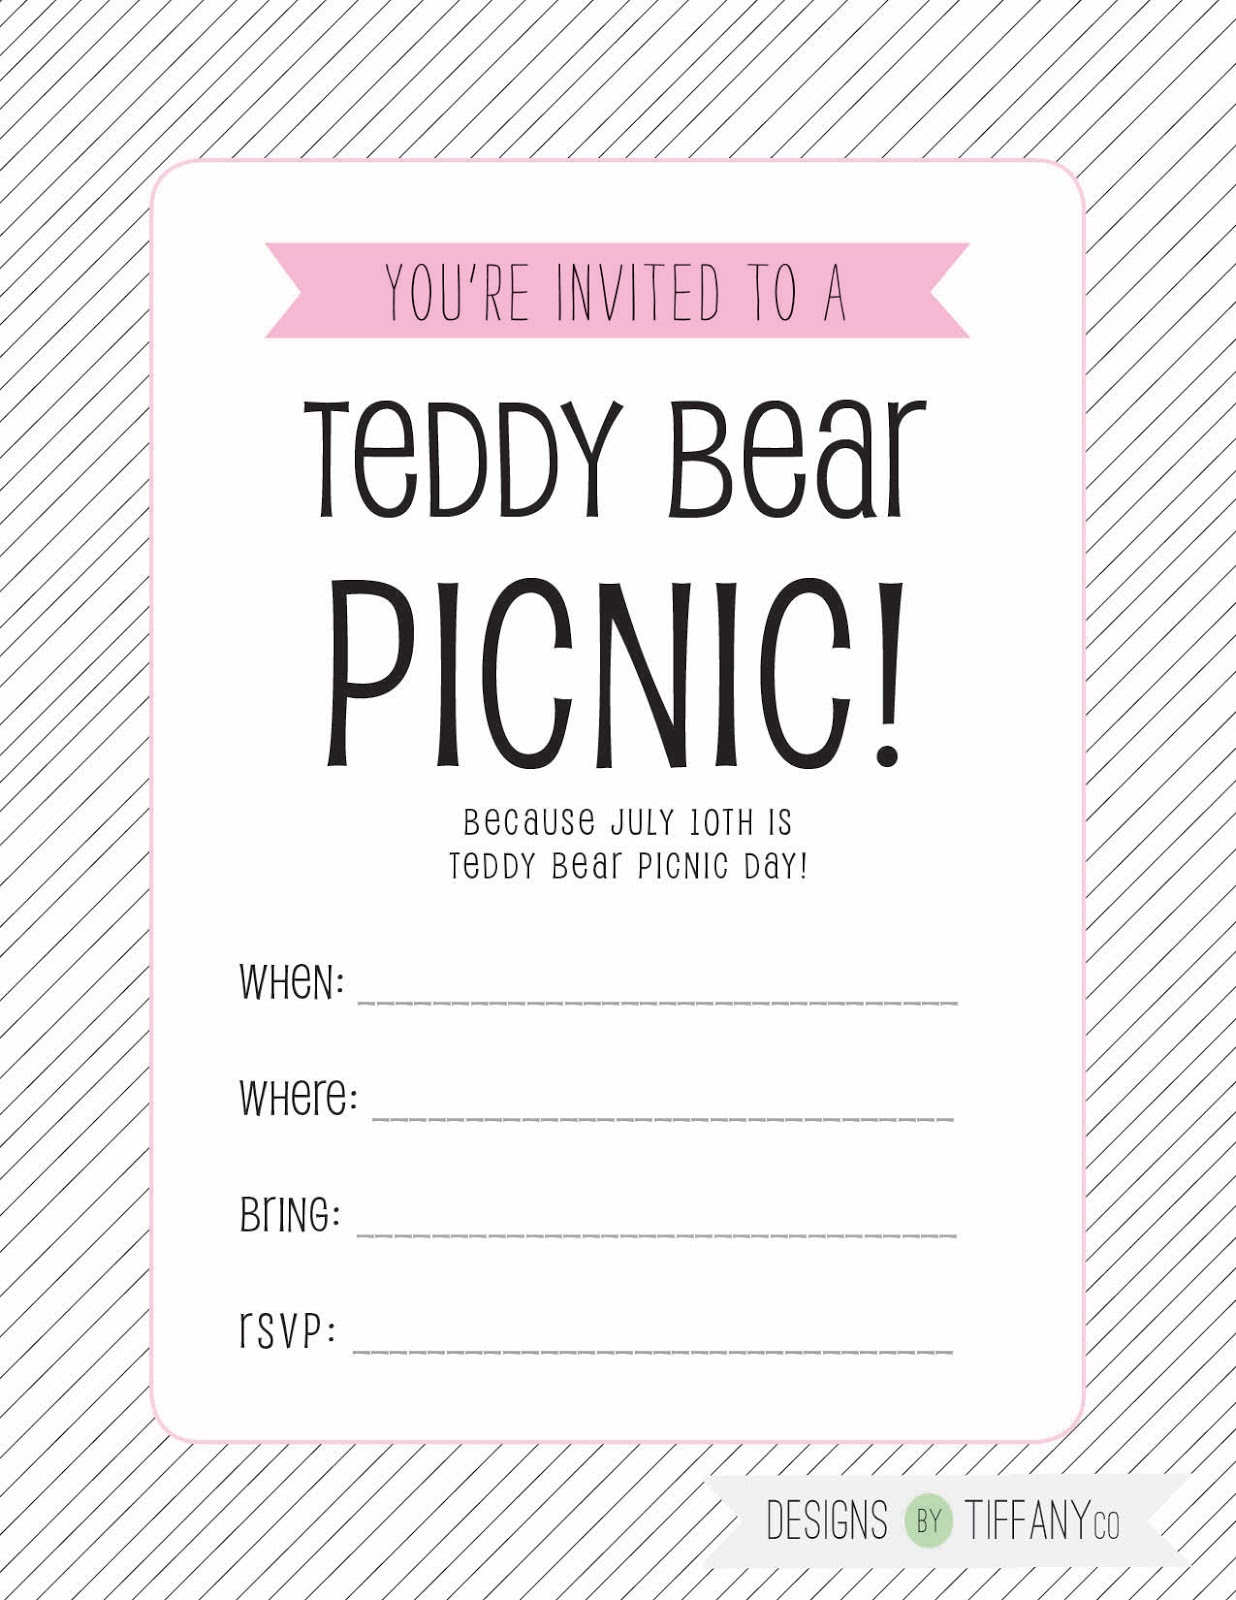 Free Printable : July 10th is Teddy Bear Picnic Day! - Designs by TiffanyCo